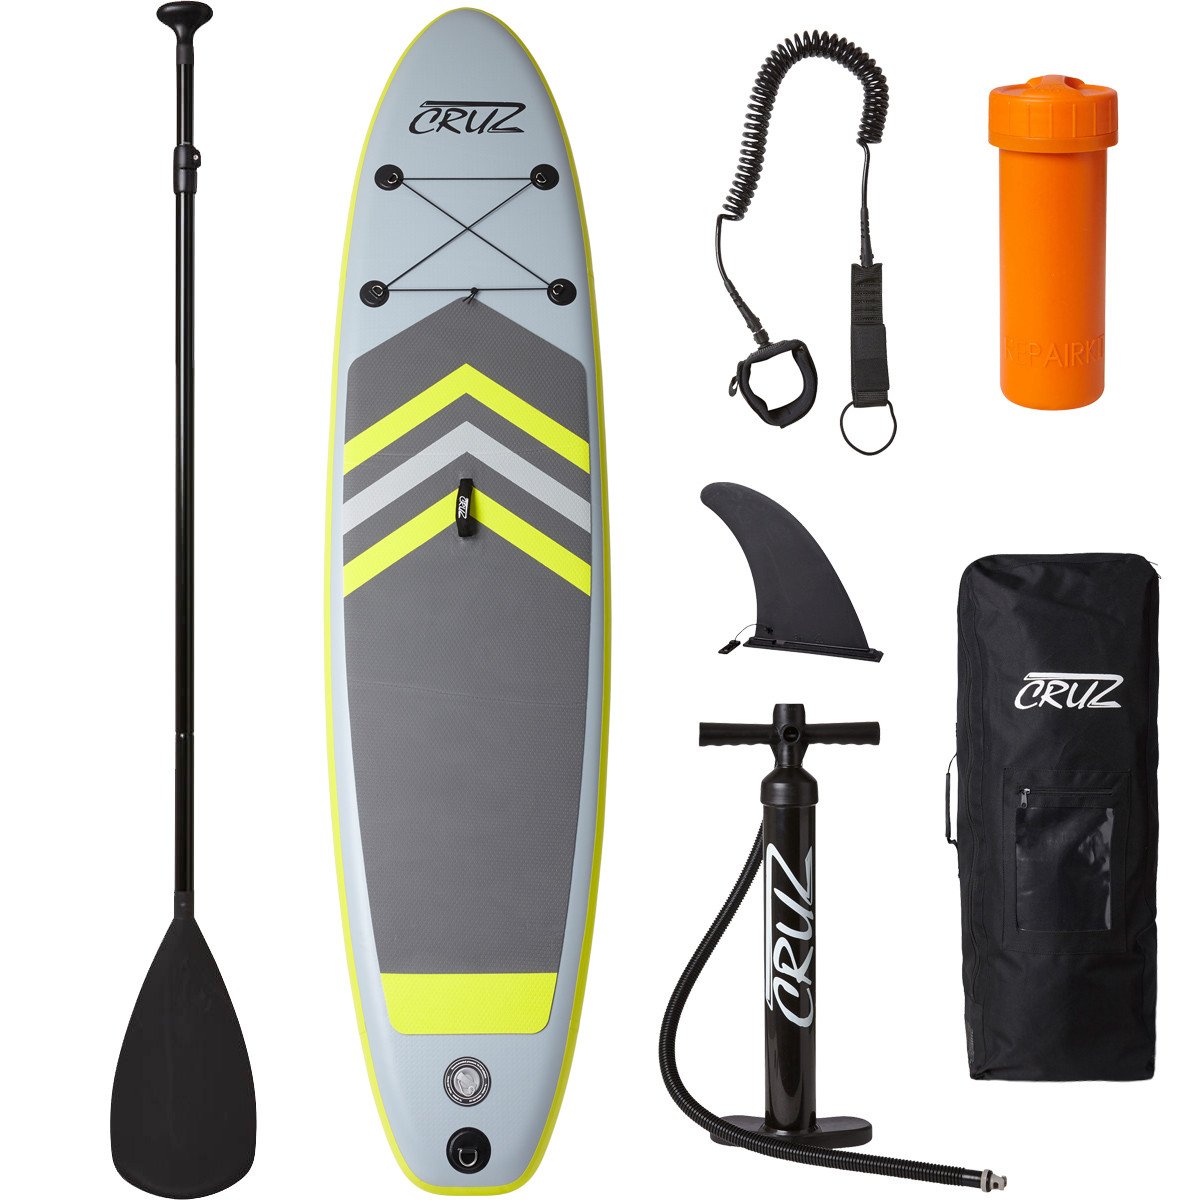 Cruz Oppusteligt 2-lags Stand Up Paddle board, Various Grey